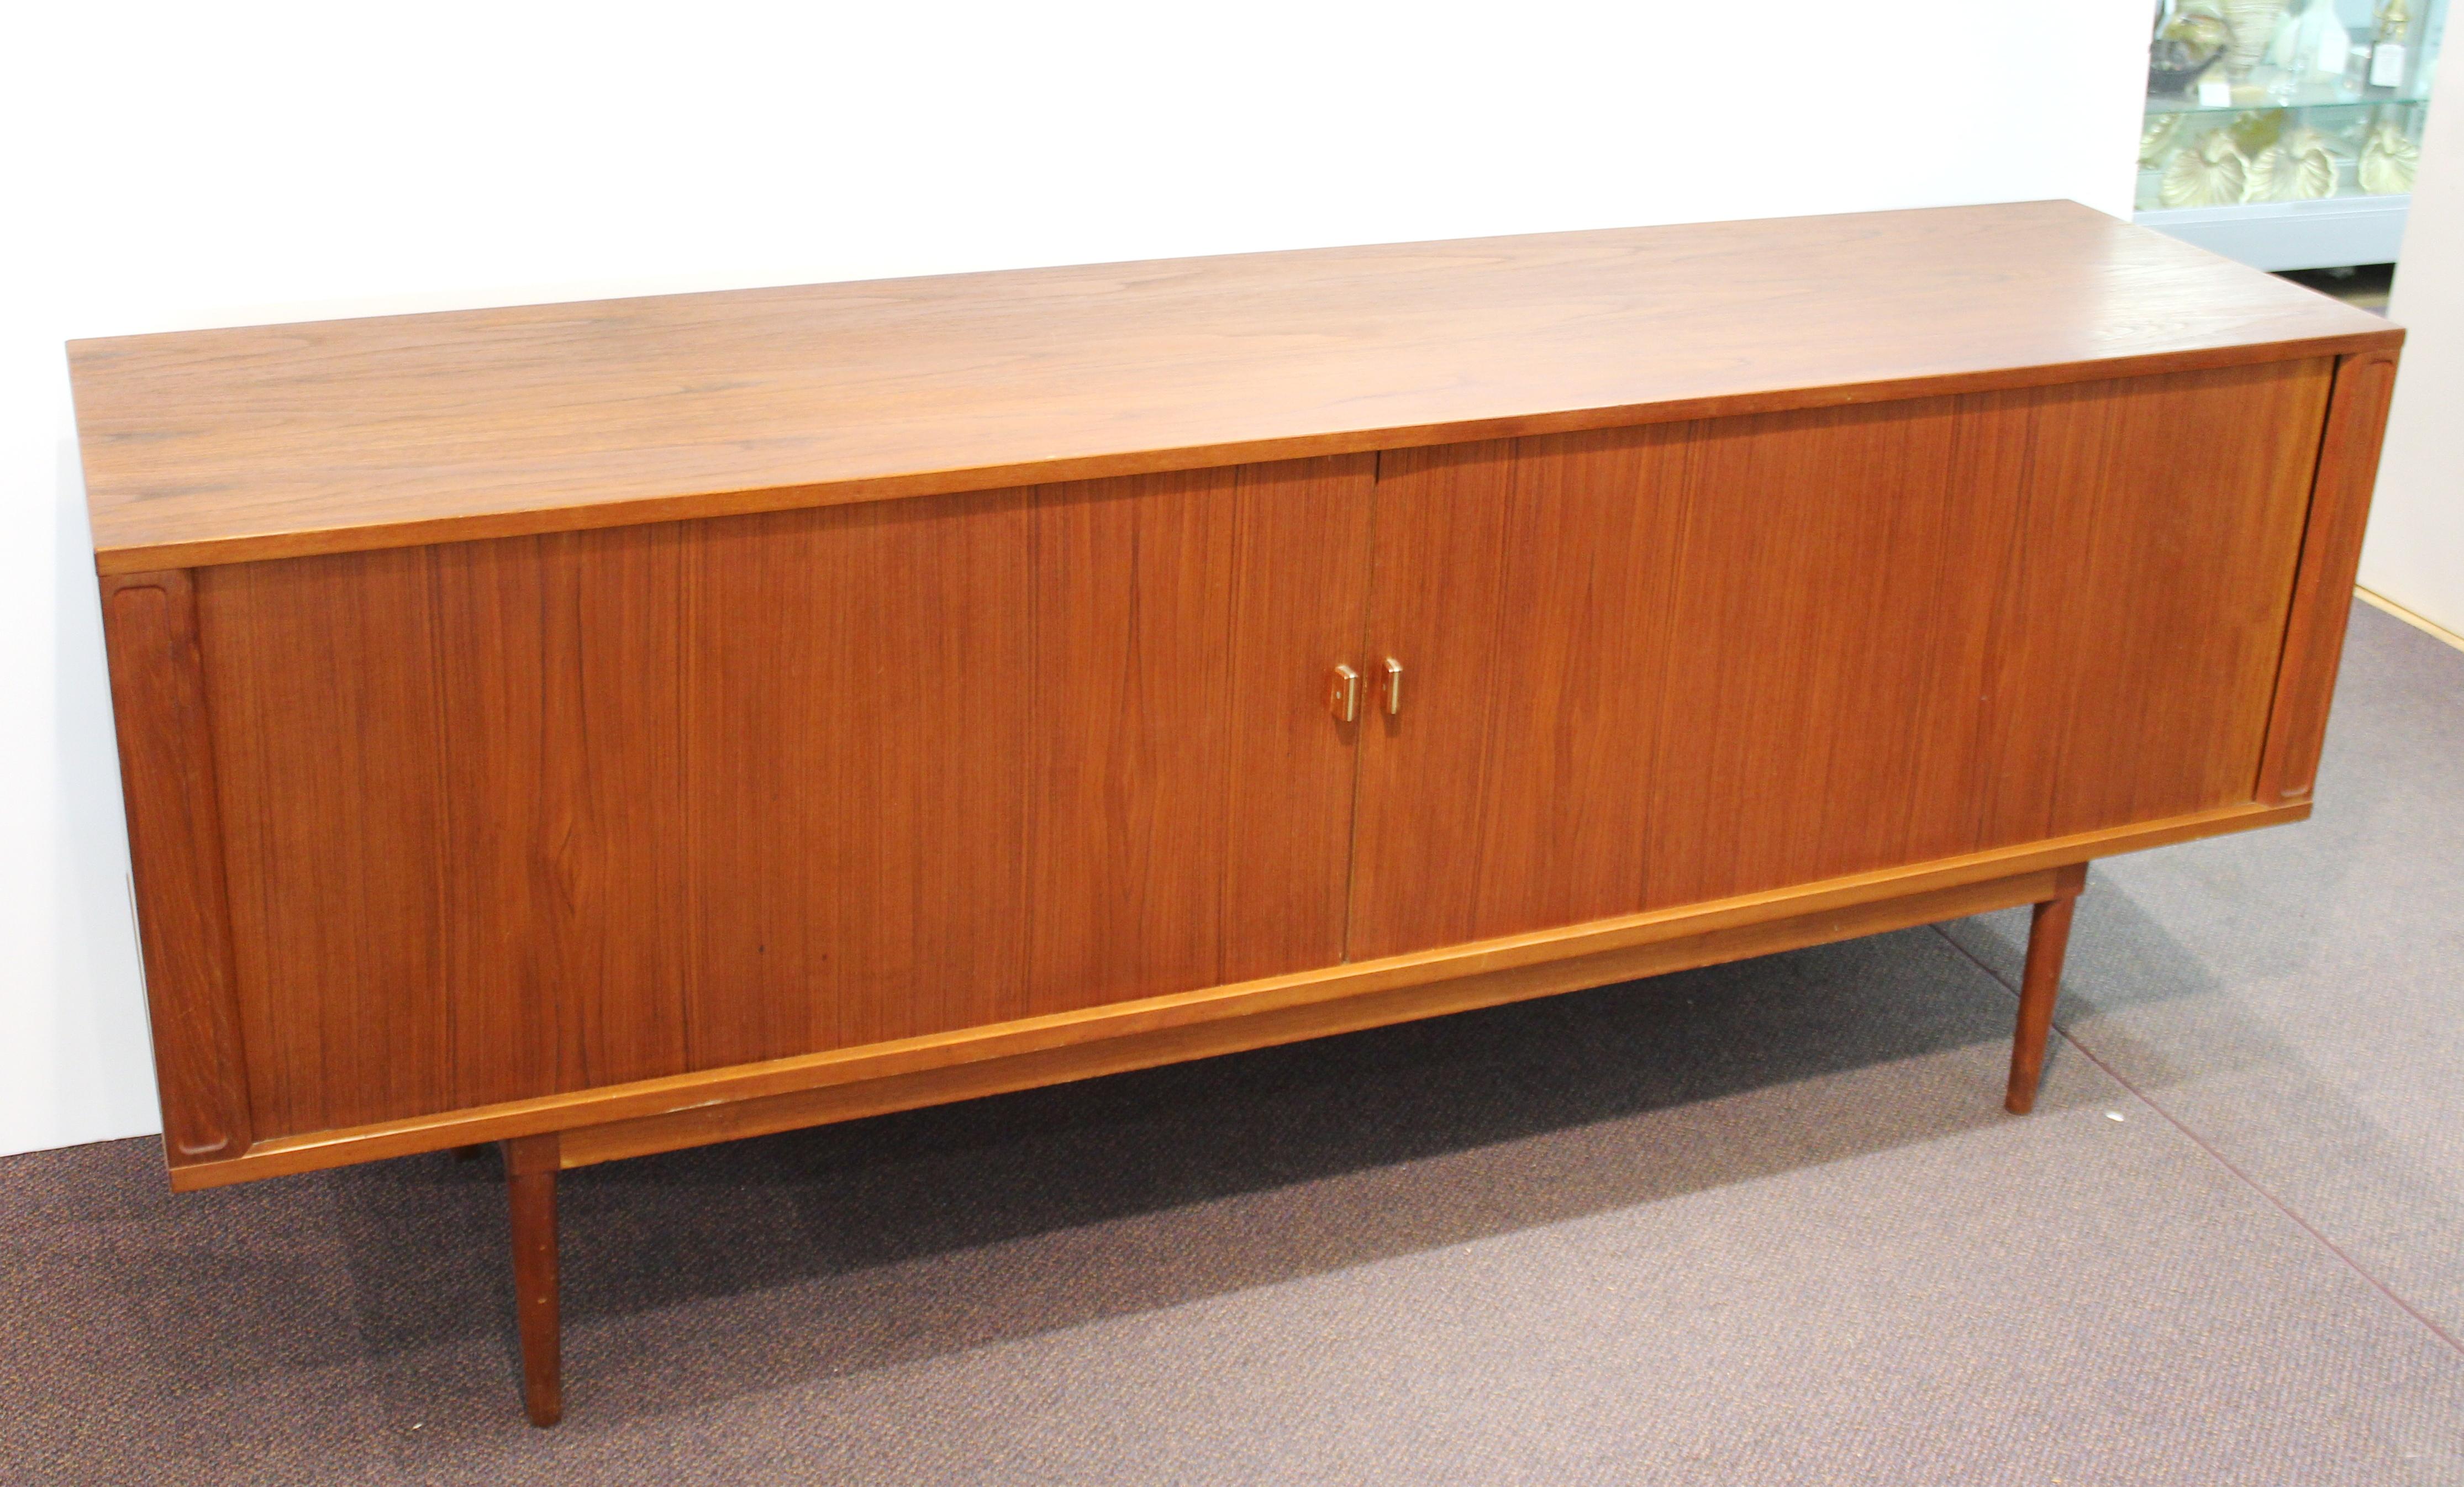 Danish modern credenza designed by Peter Løvig Nielsen in the 1960s. The piece has two tambour doors that slide open to reveal two compartments with storage shelving and one central compartment with flat tray drawers. The pulls have metal accents.